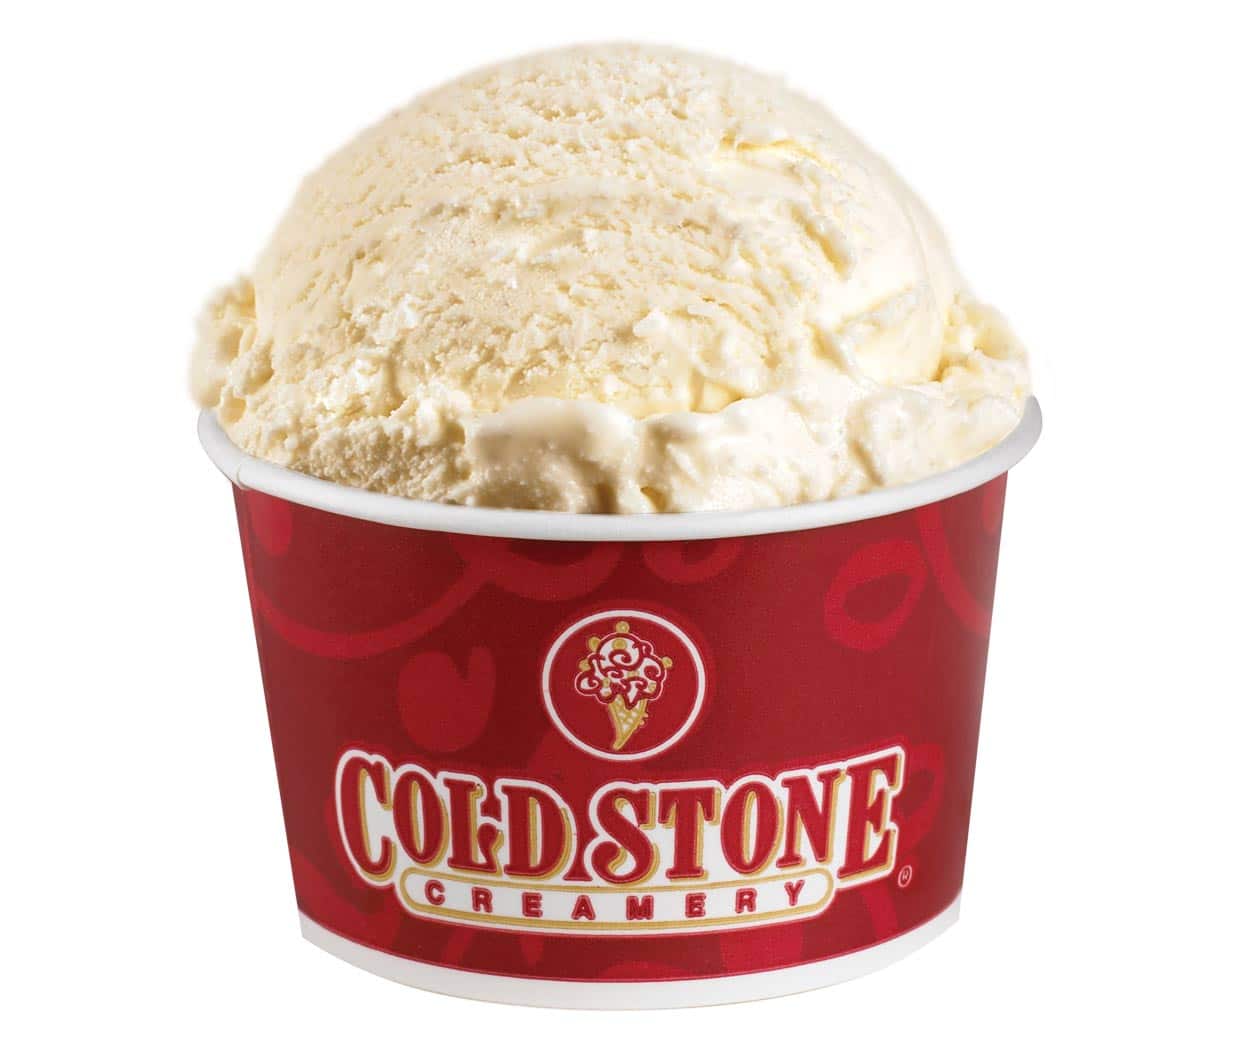 French Vanilla Ice Cream (Like It) from Cold Stone ...